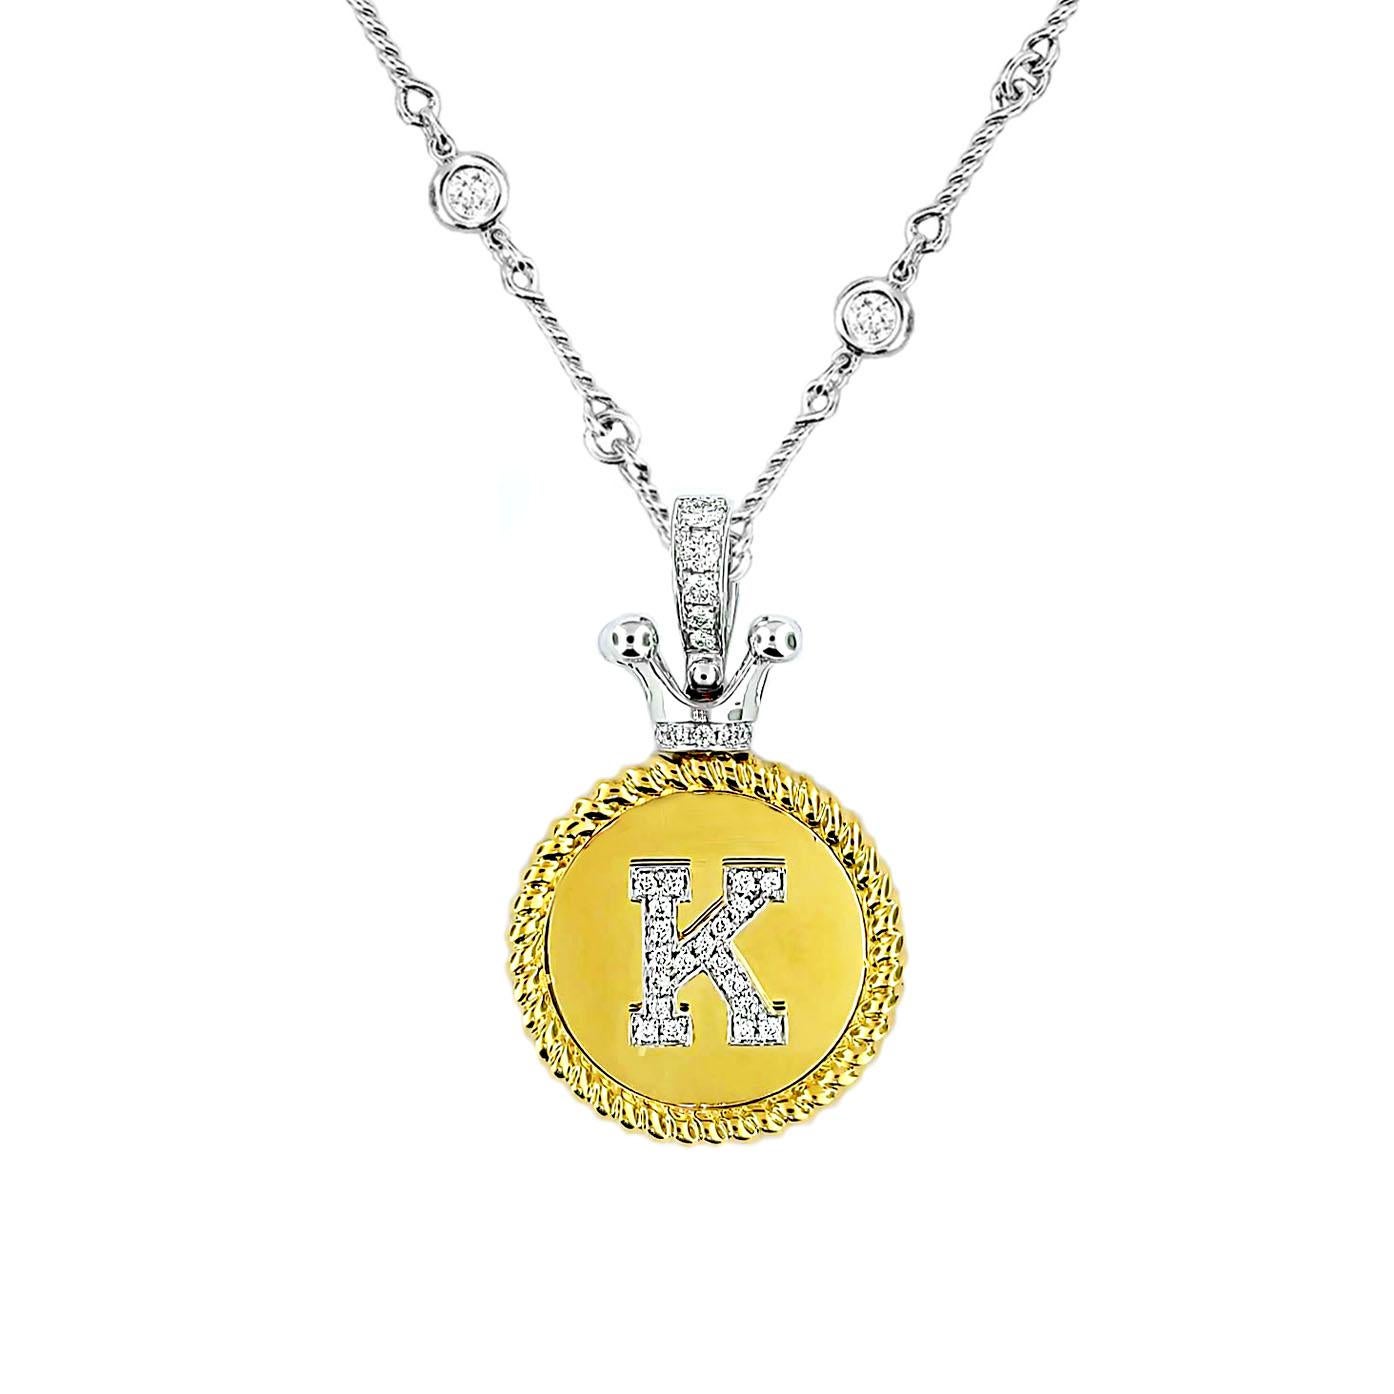 Produced by award winning Italian designer Stefano Vitolo. Stefano creates custom artisanal one of a kind jewelry with excellent gemstones in a truly old world Italian craftmanship.

Gemstone: Diamonds 0.16 ctw
Initial Rope Coin: 18 x 18 mm
Total